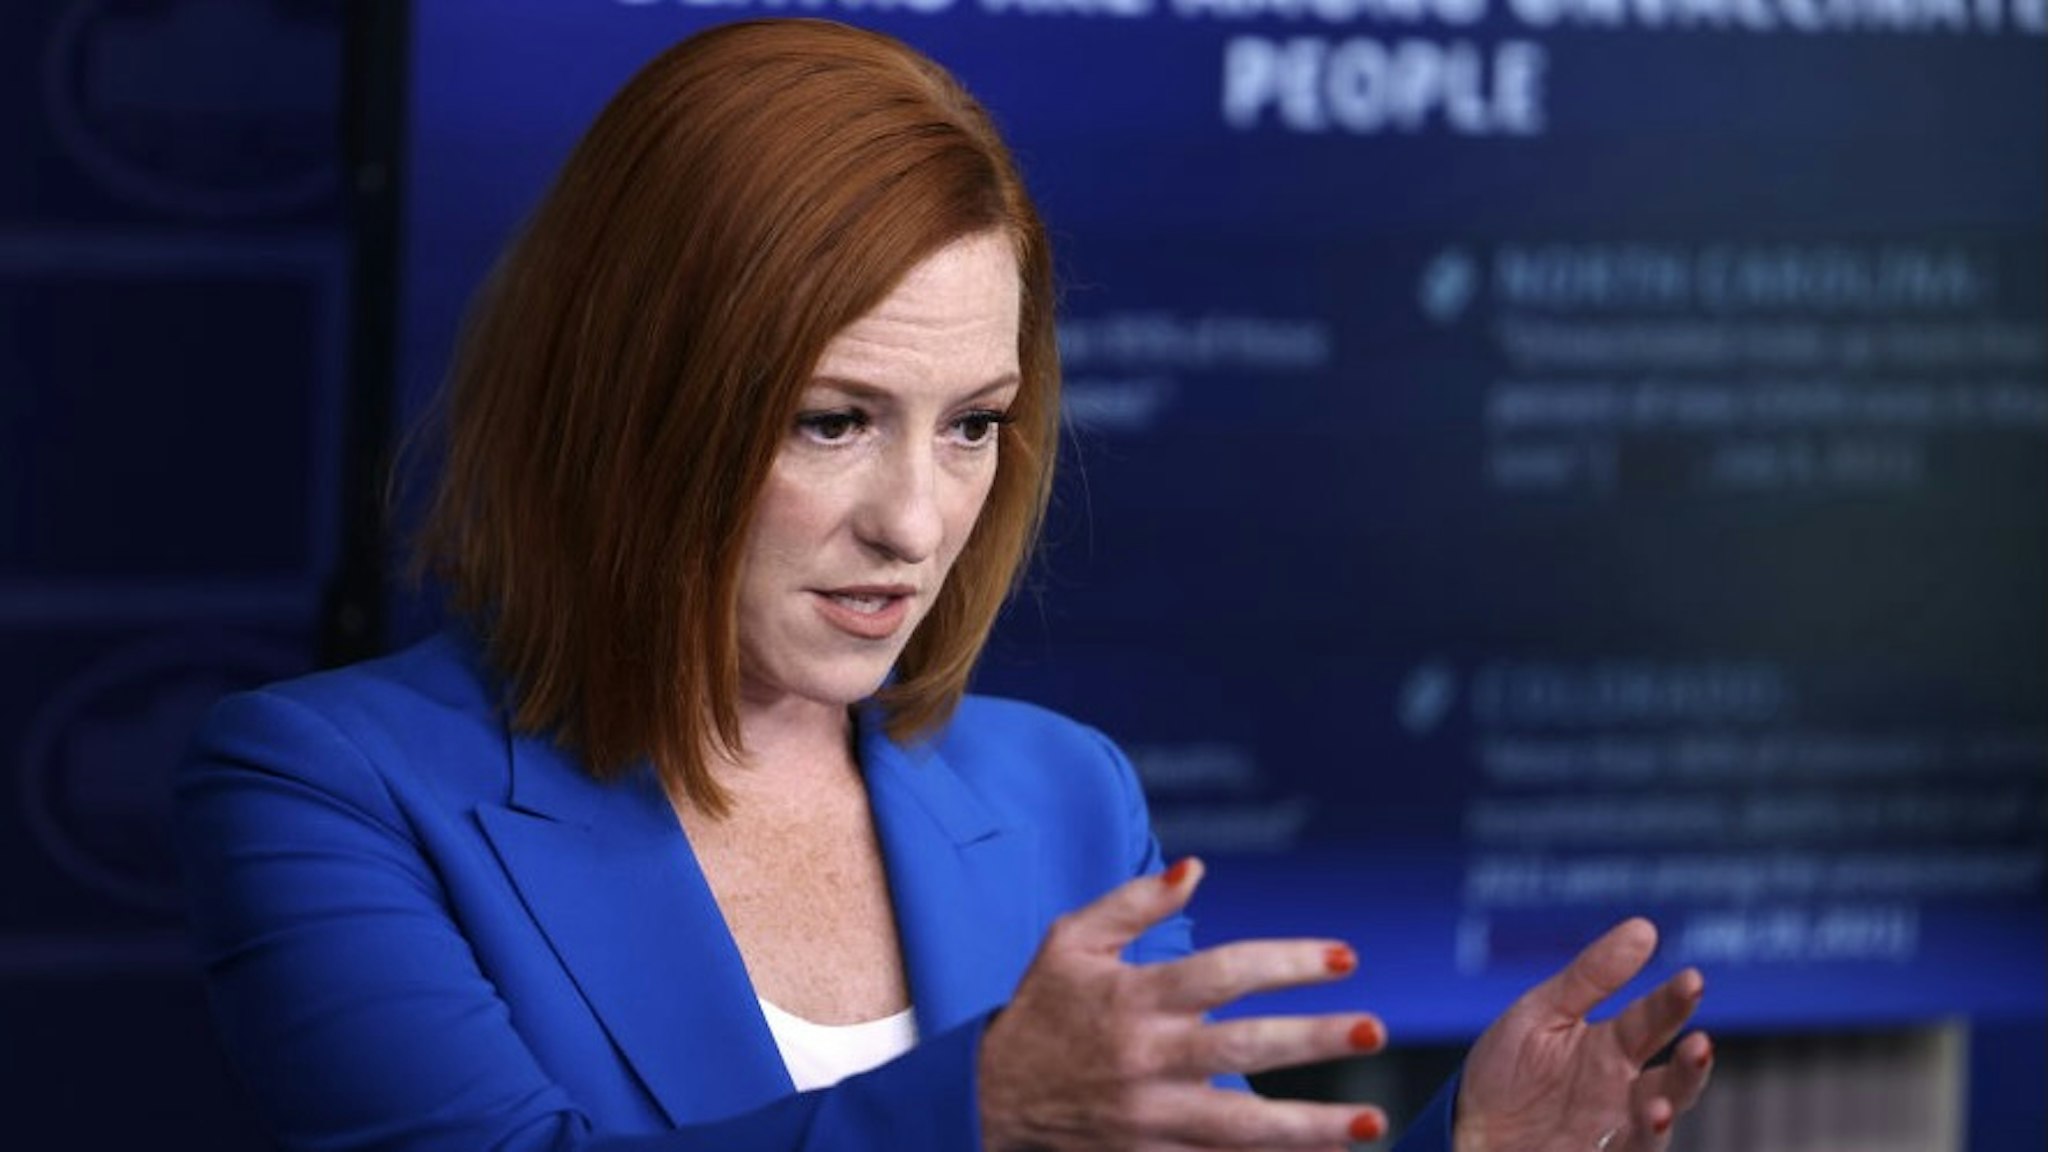 Jen Psaki Holds Daily White House Press Briefing WASHINGTON, DC - JULY 27: White House Press Secretary Jen Psaki gestures as she speaks at a daily press briefing in the James Brady Press Briefing Room of the White House on July 27, 2021 in Washington, DC. Psaki fielded questions from reporters on the potential updated CDC guidance on indoor mask-wearing for those vaccinated against COVID-19. (Photo by Anna Moneymaker/Getty Images) Anna Moneymaker / Staff via Getty Images